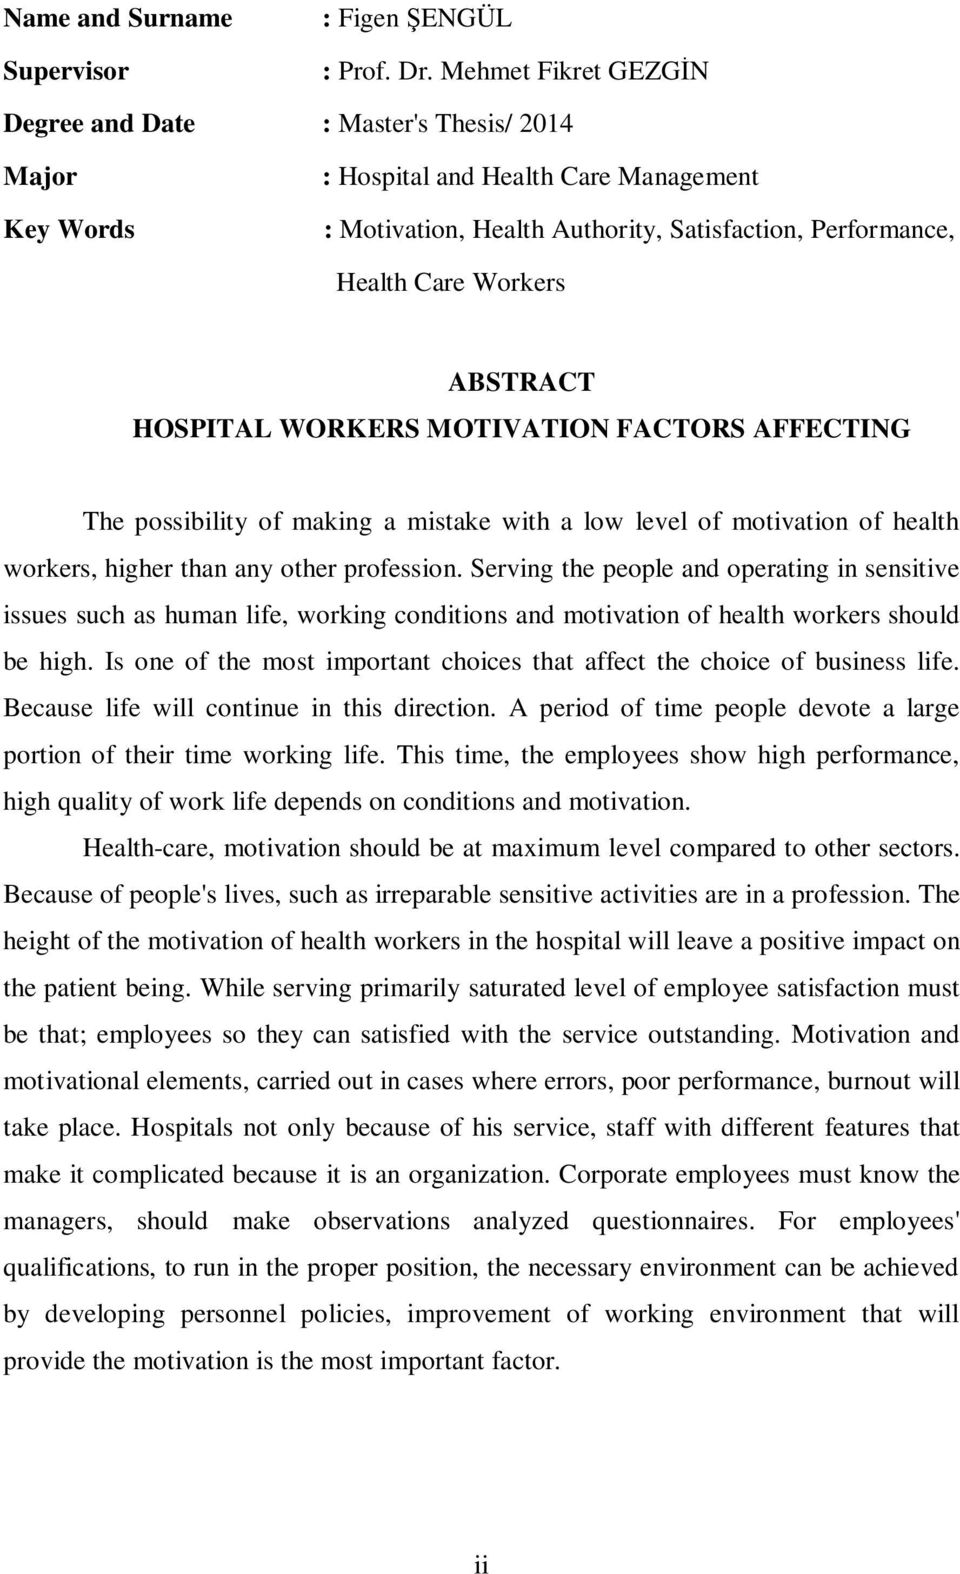 ABSTRACT HOSPITAL WORKERS MOTIVATION FACTORS AFFECTING The possibility of making a mistake with a low level of motivation of health workers, higher than any other profession.